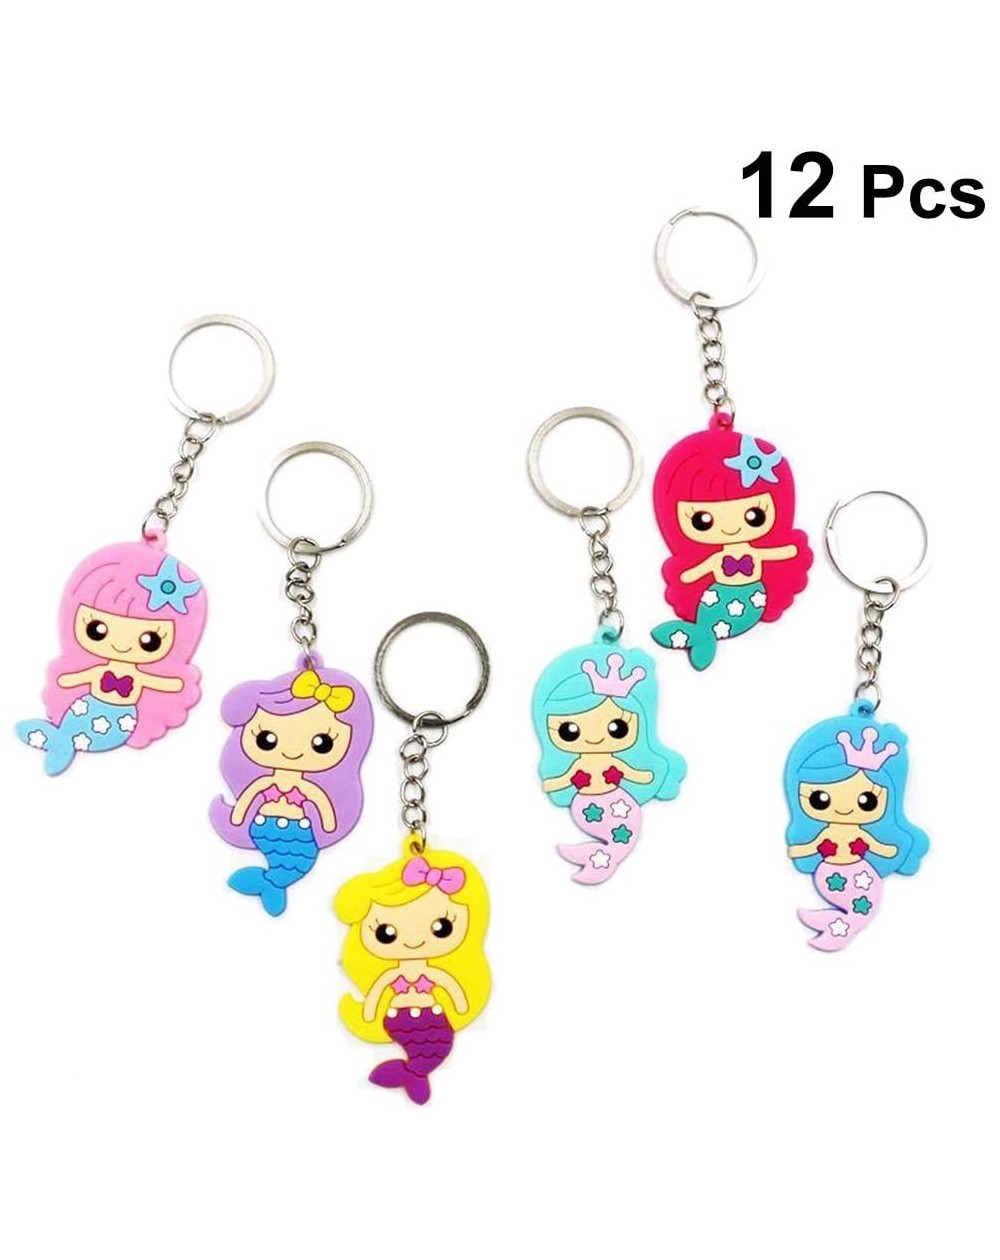 Party Favors Cute Mermaid Keychains Silicone Keyrings for Girls Mermaid Birthday Party Favors Party Gifts-12Pcs (Random Mix) ...